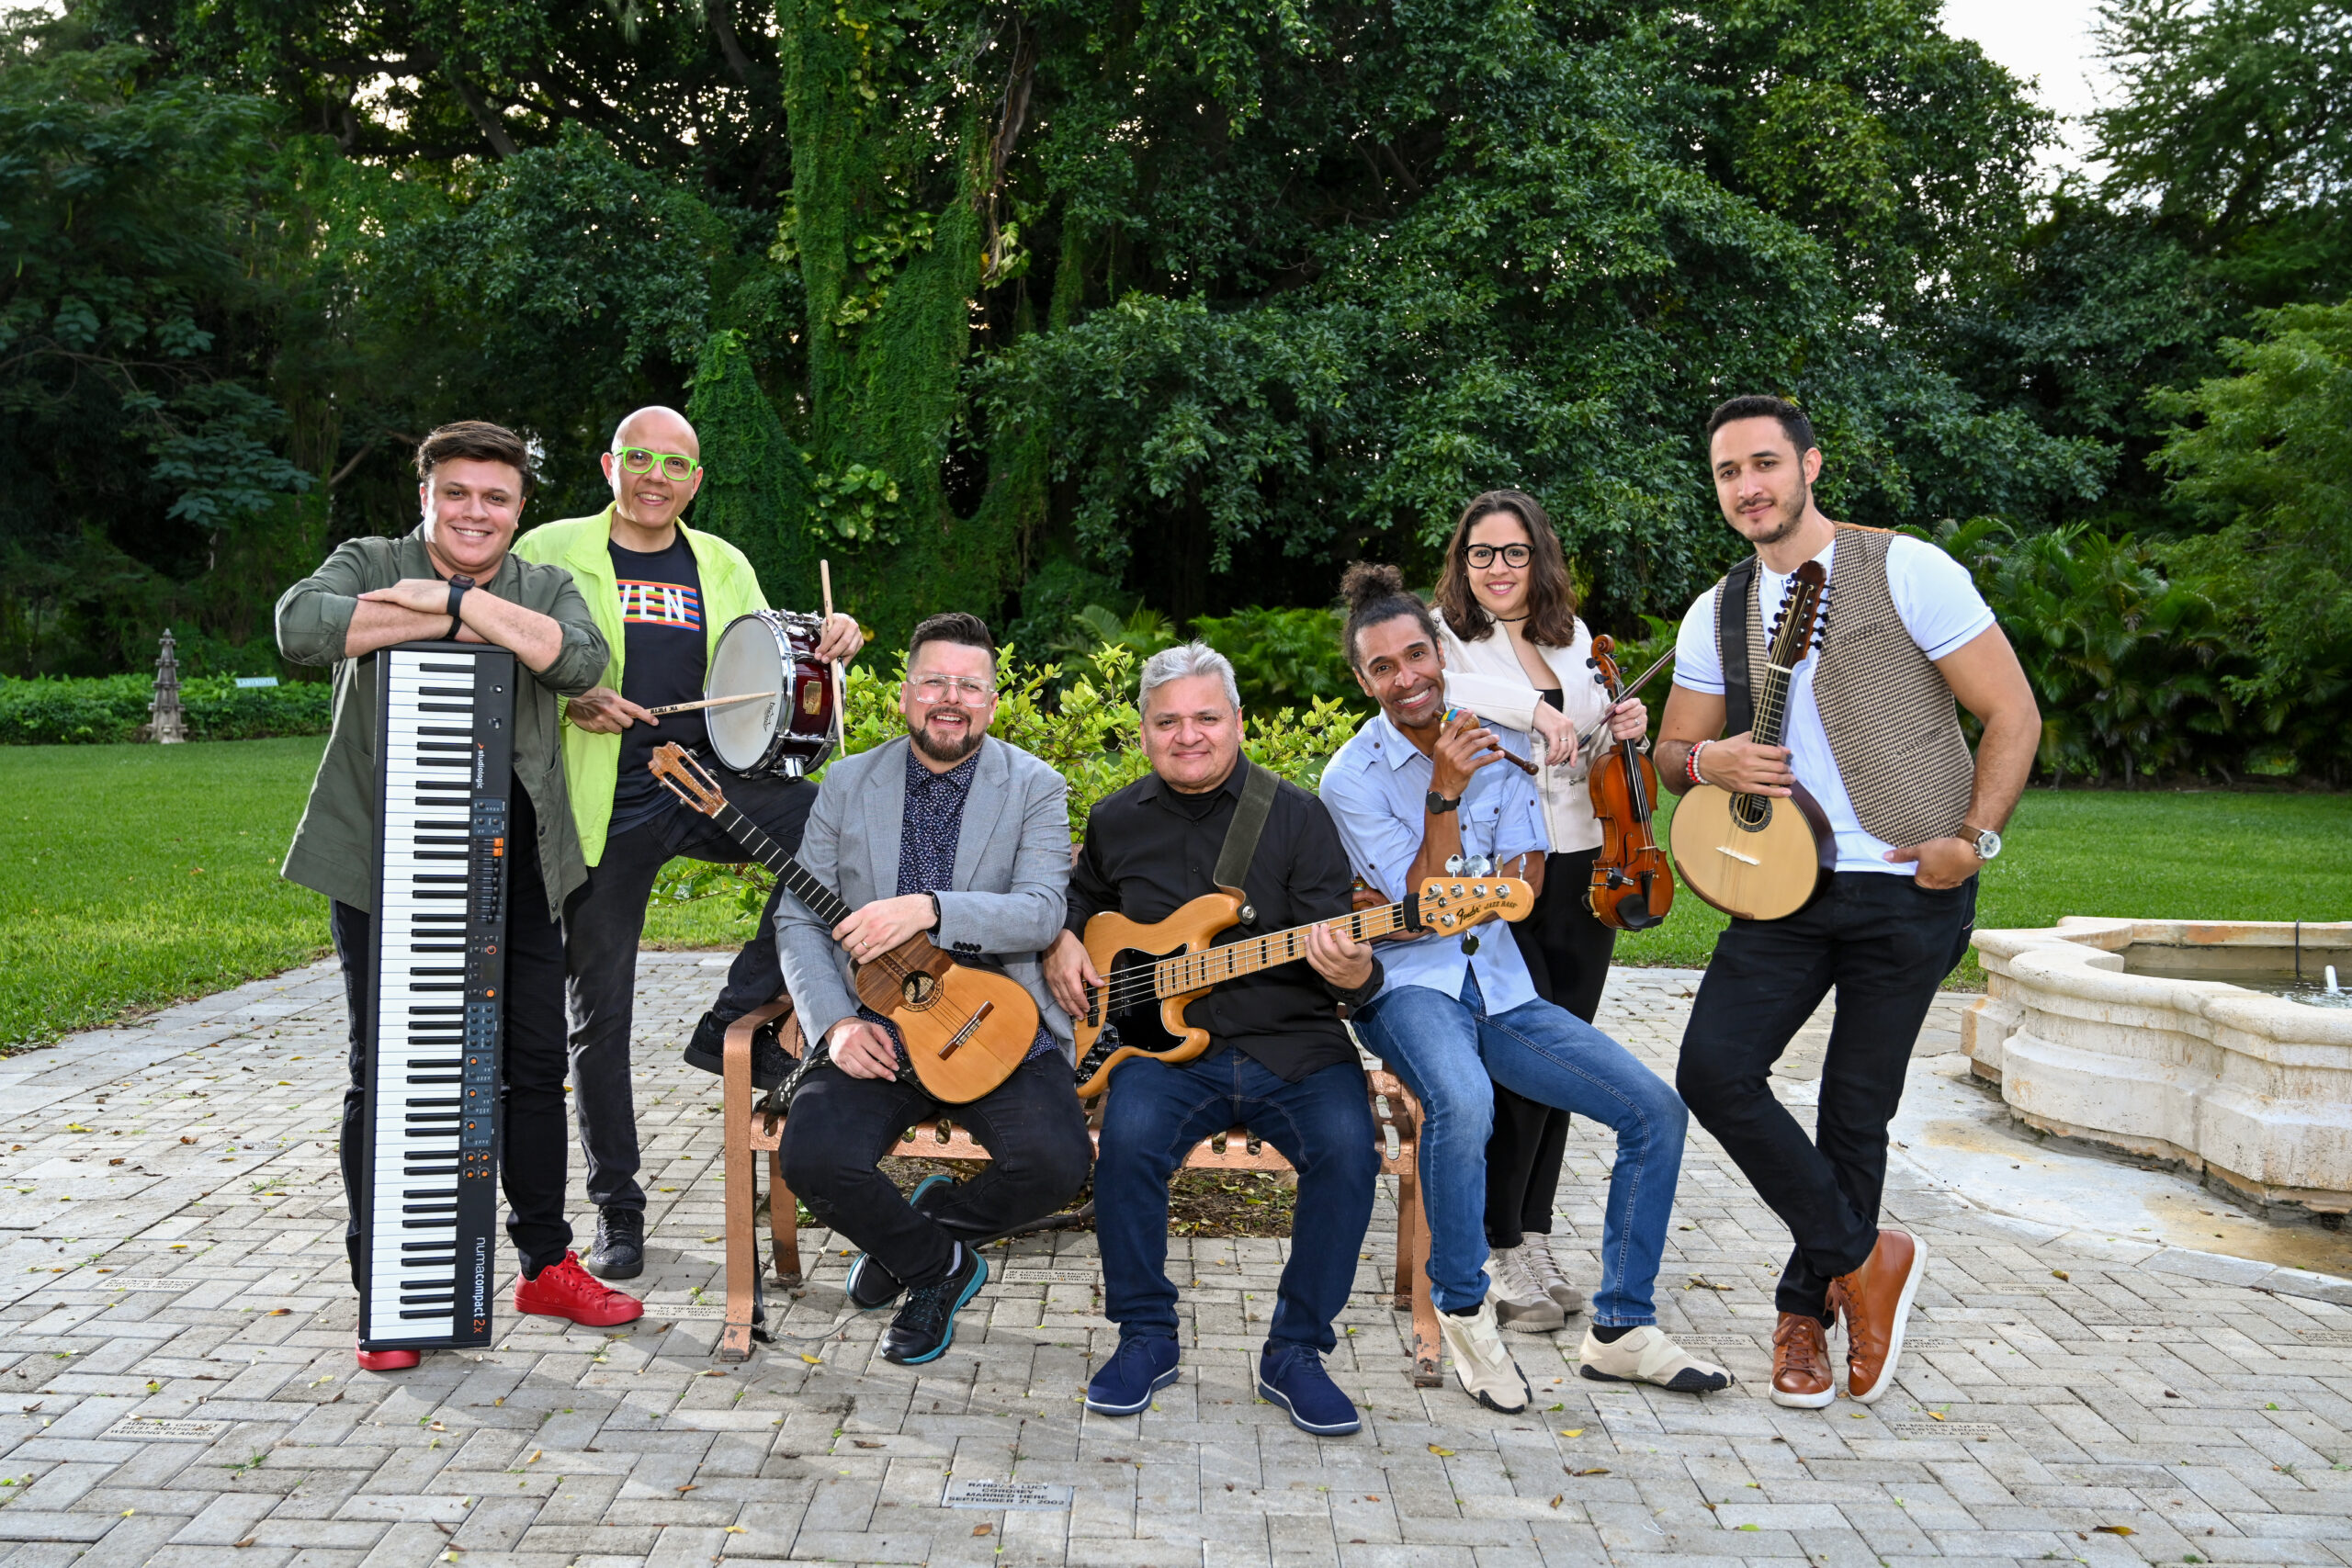 The Henry Linarez Ensemble includes seven musicians seated and standing around a bench, each holding their instrument: keyboard, snare drum, cuatro, bass, maracas, violin, and mandolin